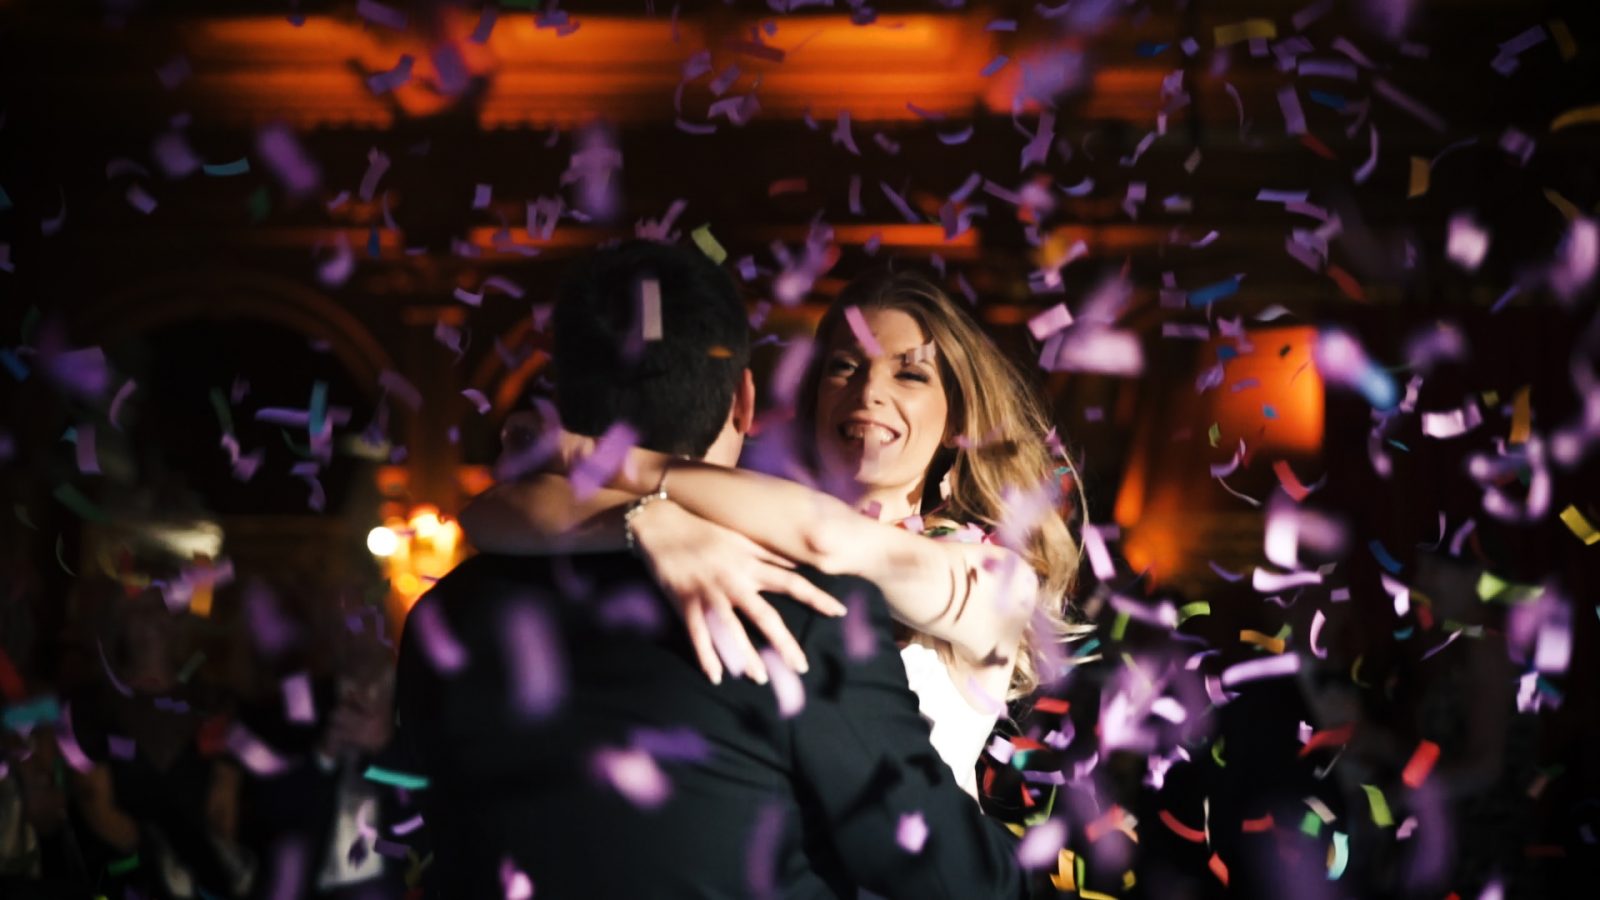 A Bride holds her groom as confetti falls around them